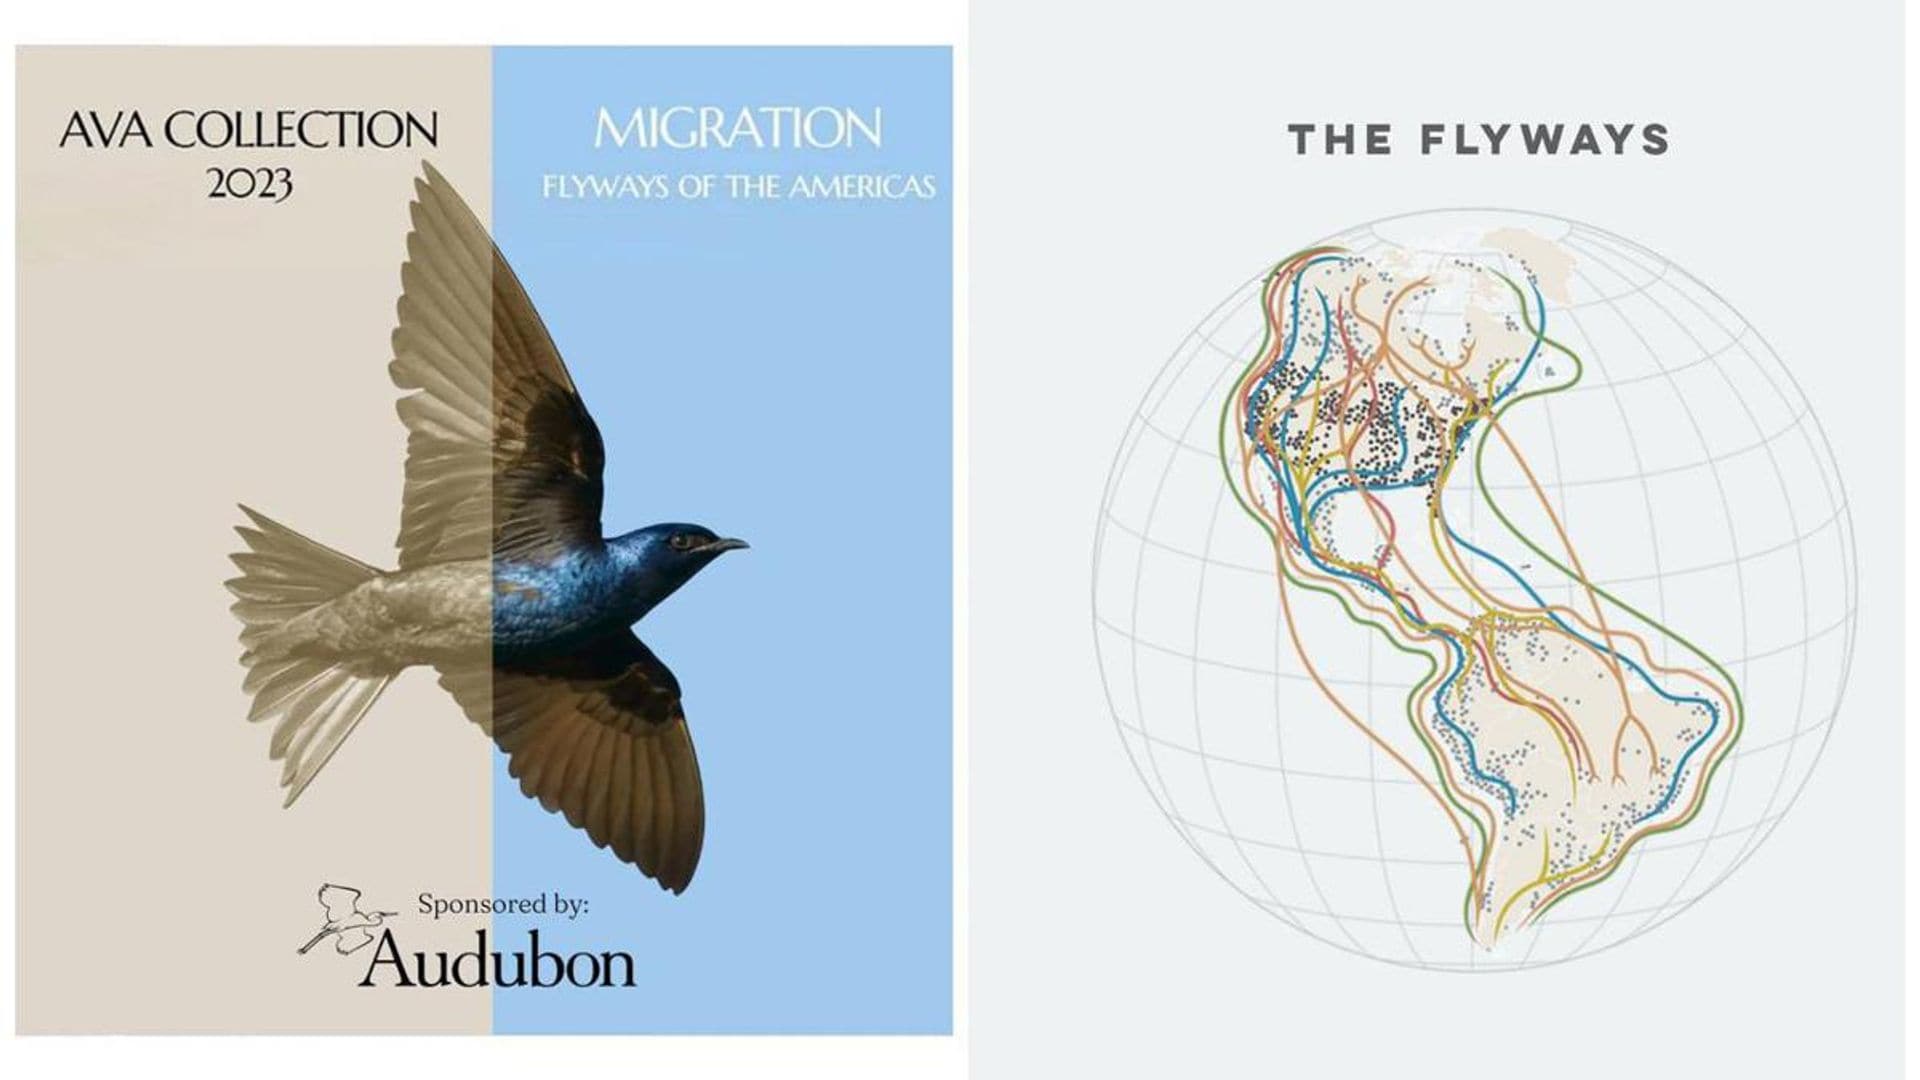 AVA Collection & Silent Auction 2023: "MIGRATION: Flyways of the Americas"